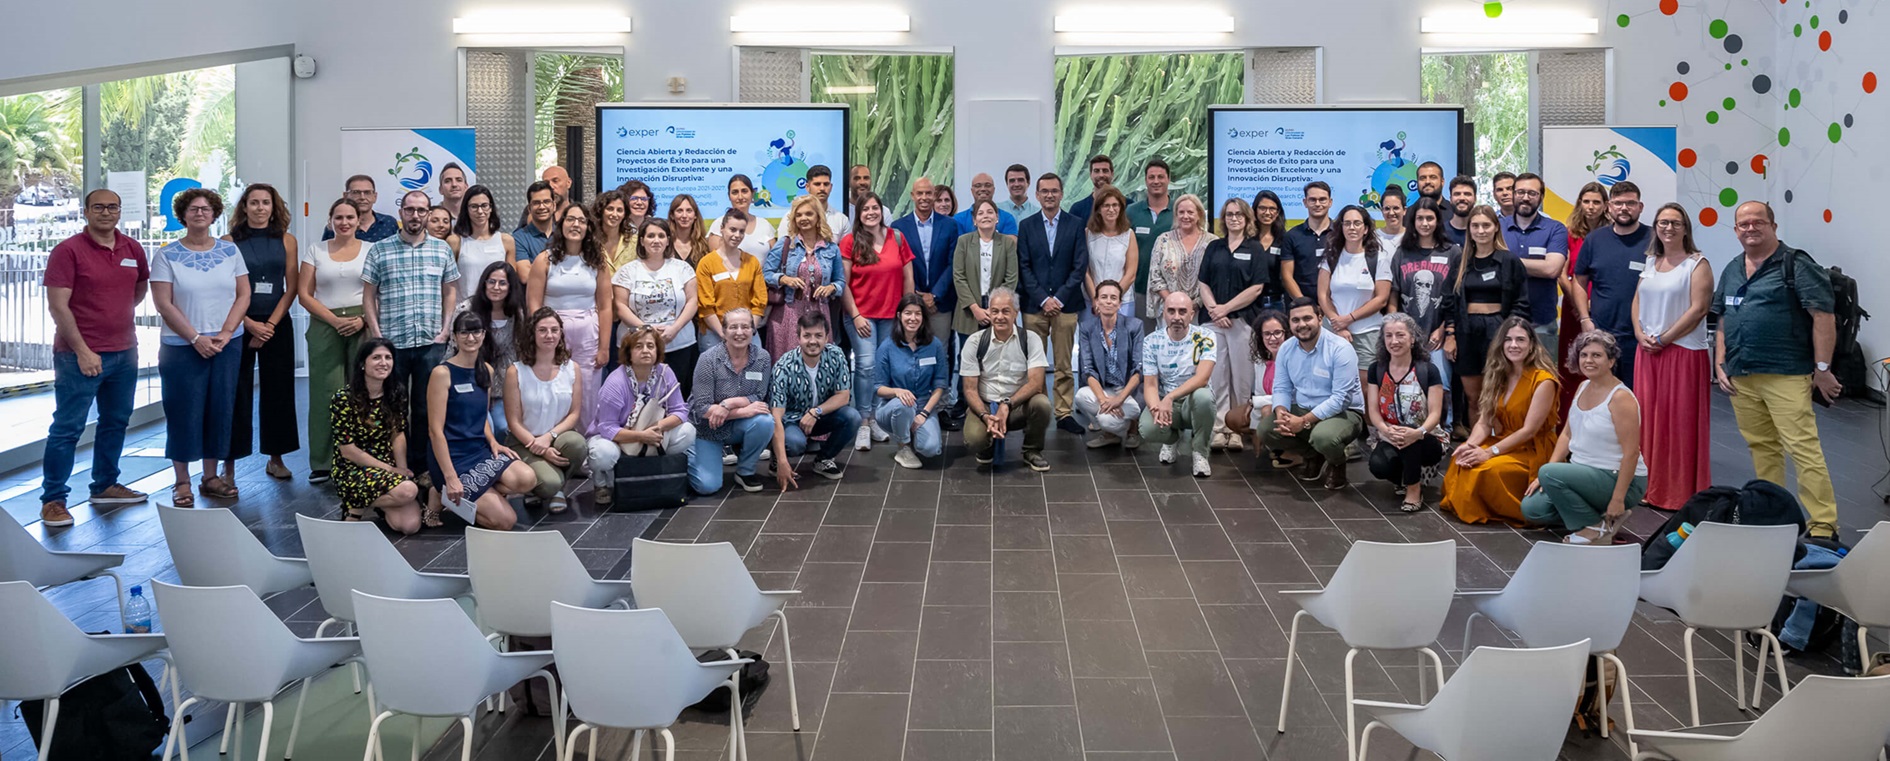 Grand Success at the EXPER Summer School in Gran Canaria: Empowering Excellence in Research and Disruptive Innovation